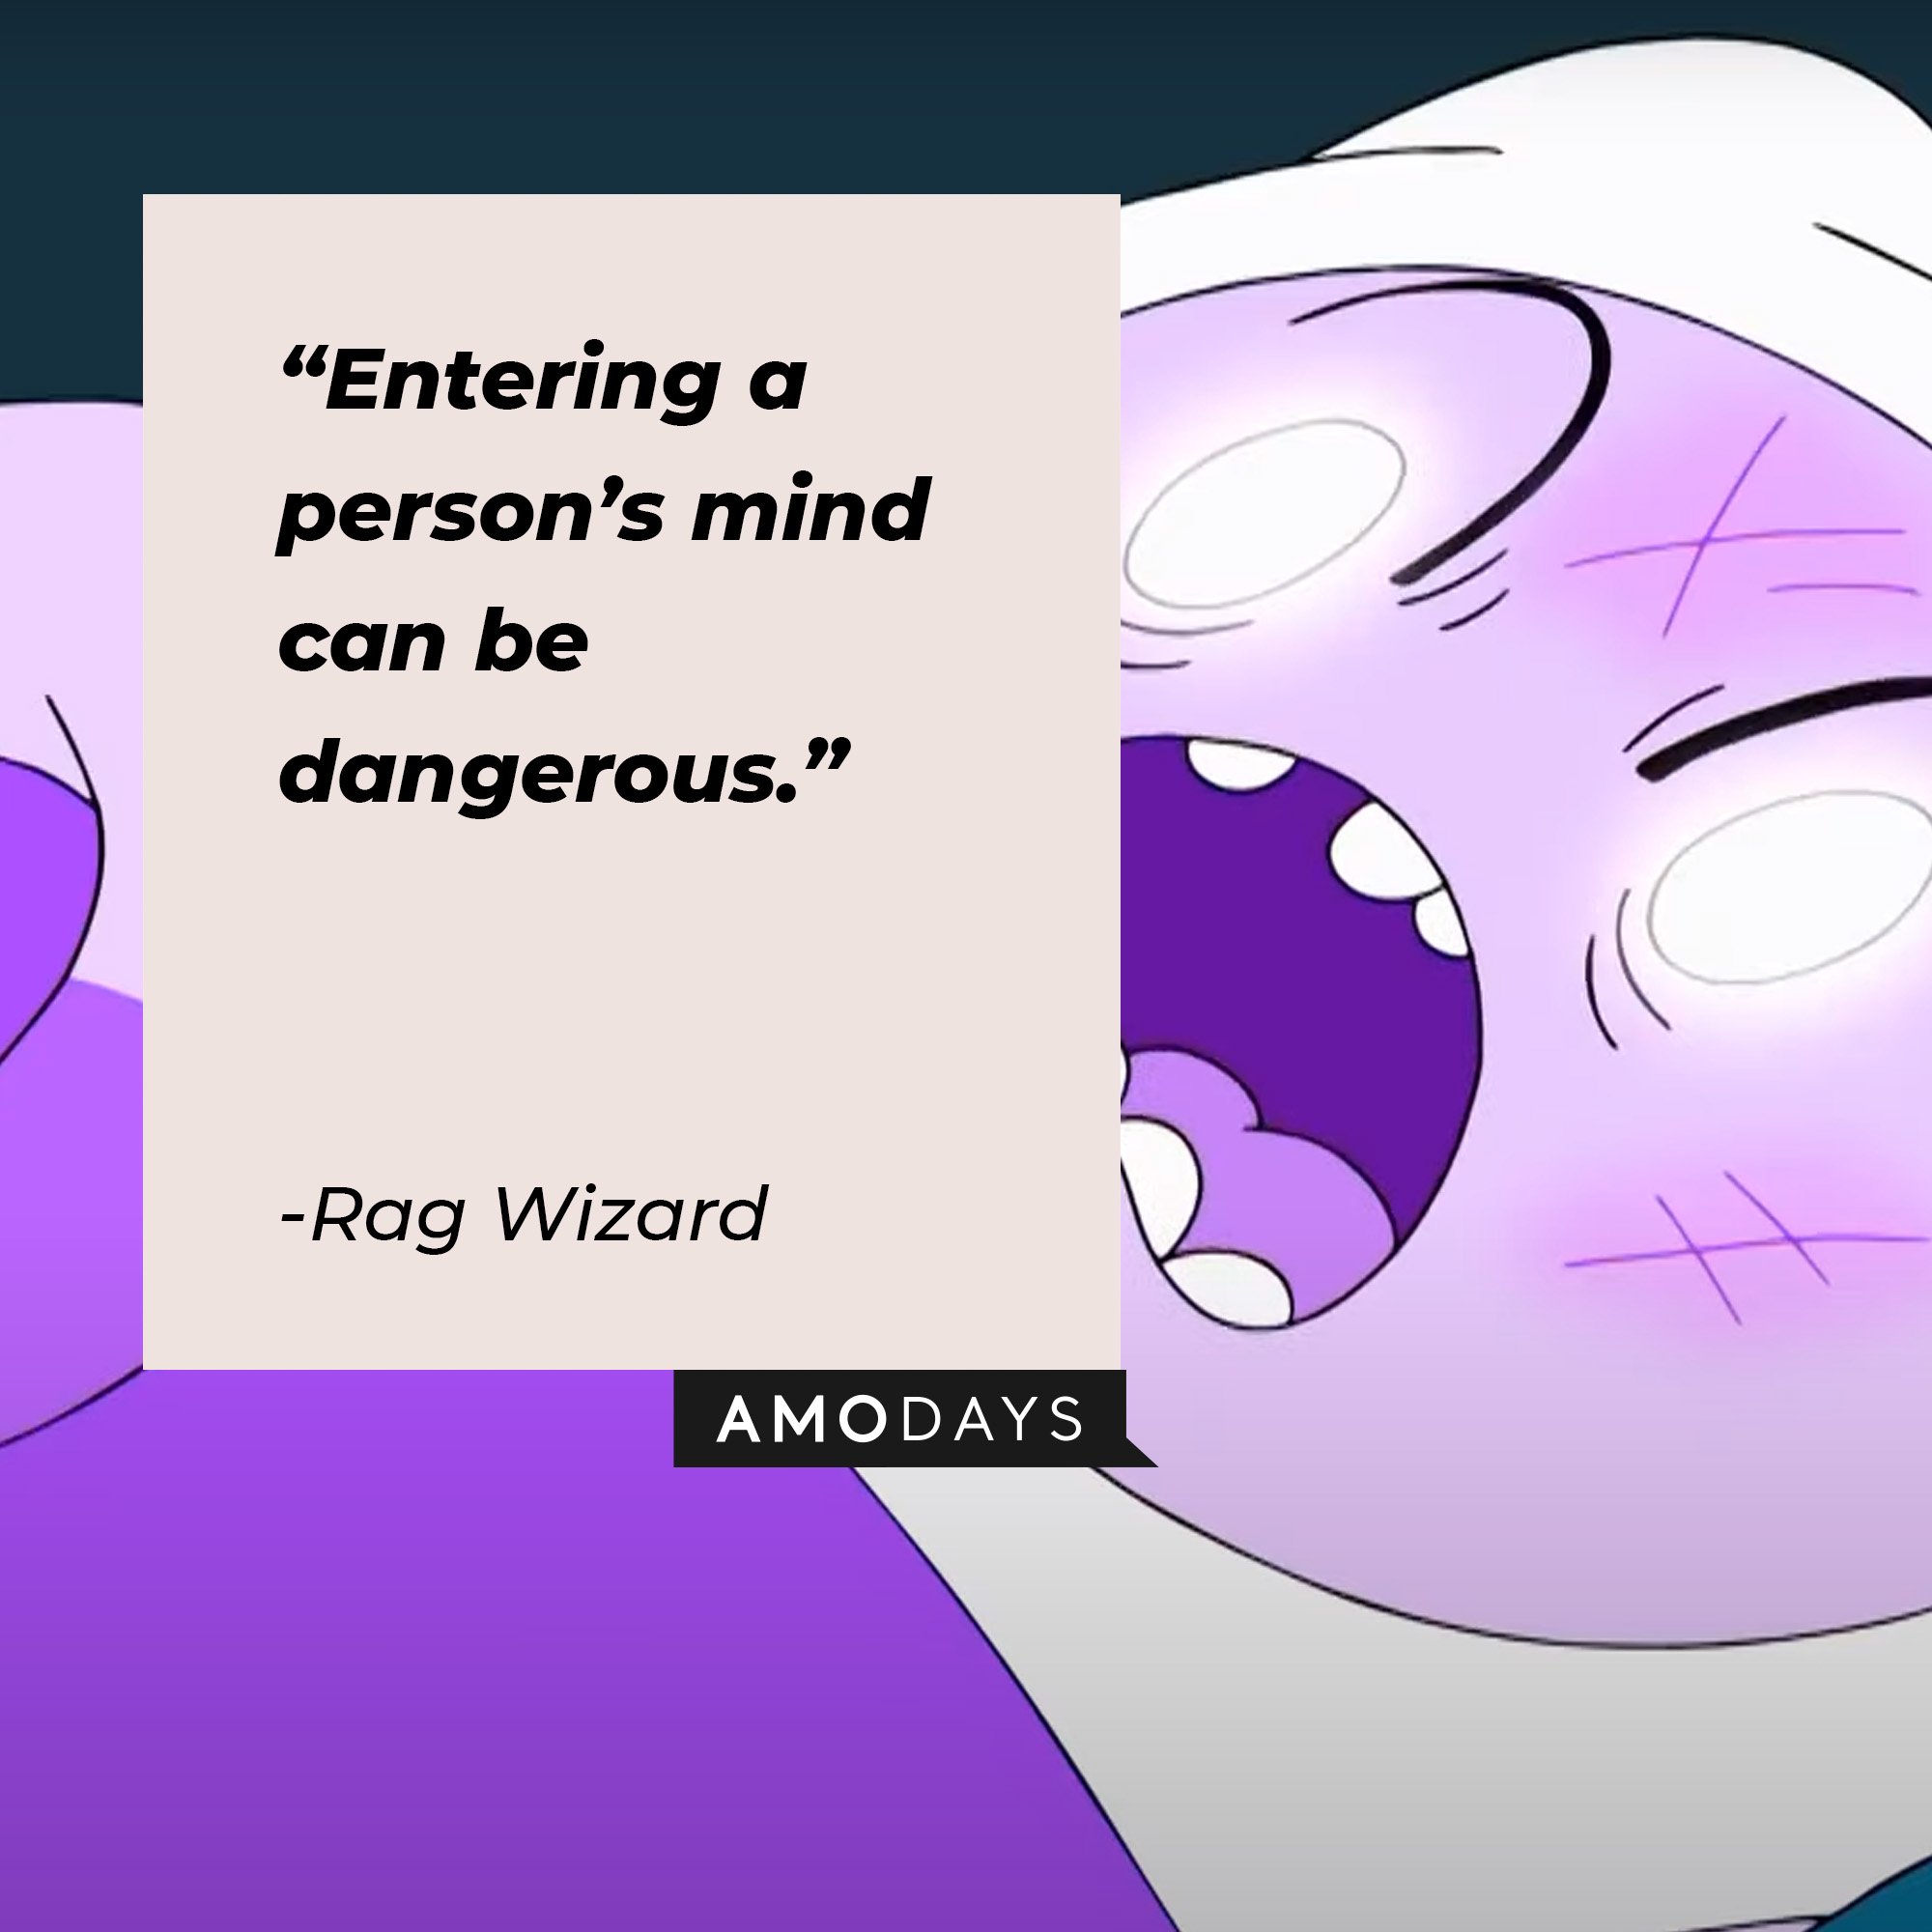 Rag Wizard’s quote: “Entering a person’s mind can be dangerous.” | Image: AmoDays